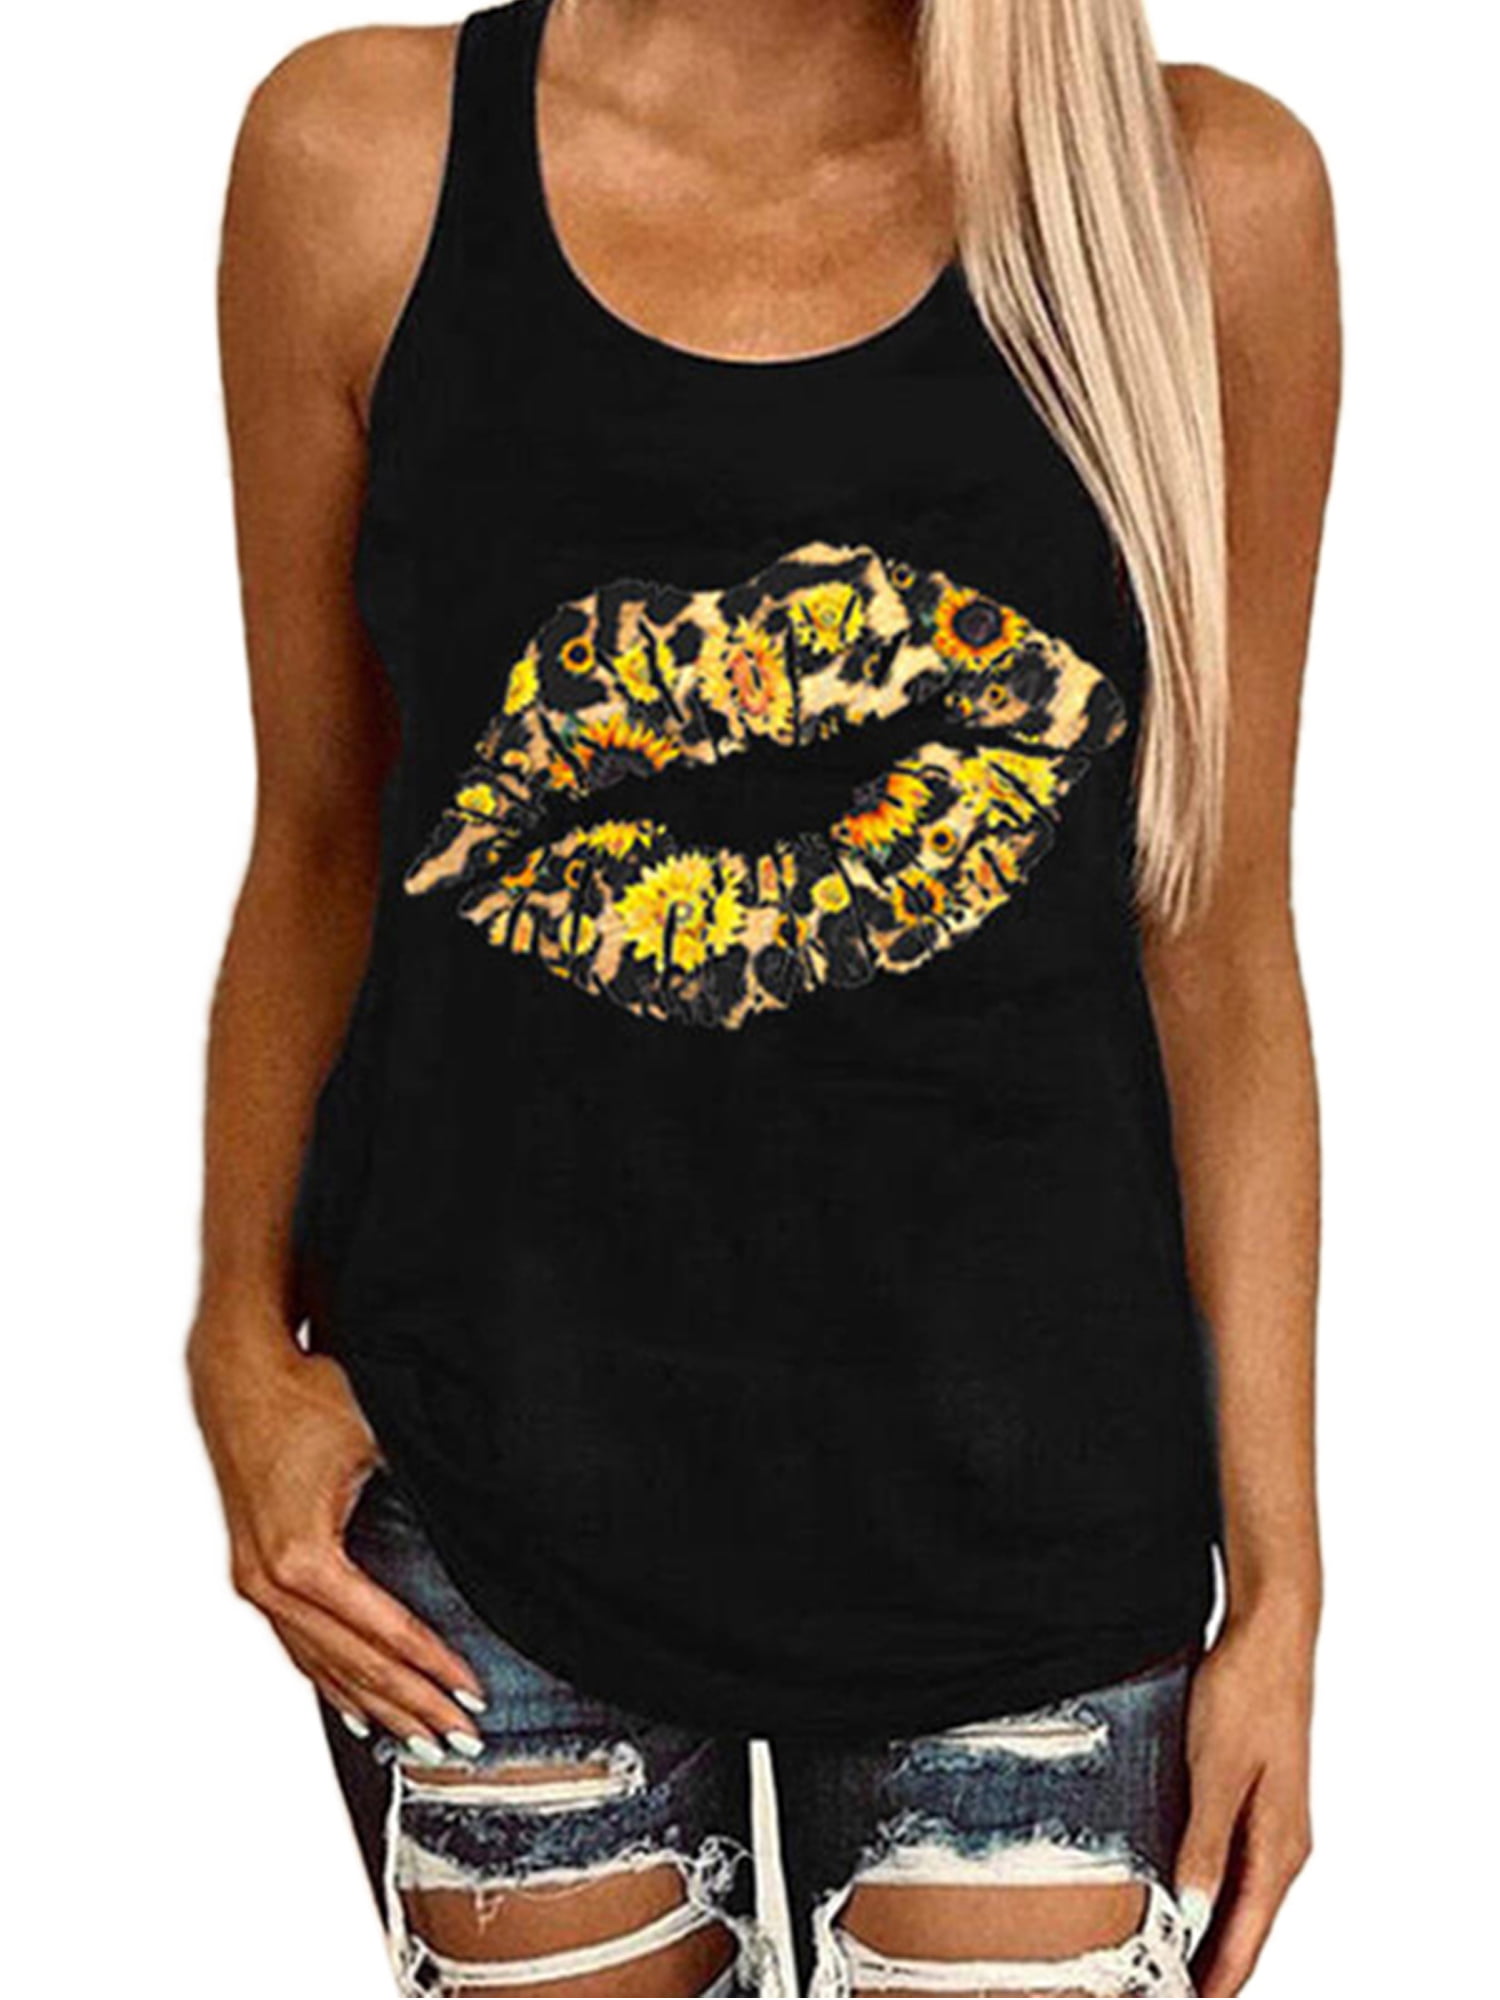 Women Leopard Pineapple Printed Tank Top Funny Graphic Vest Sleeveless Shirt Tee Tops